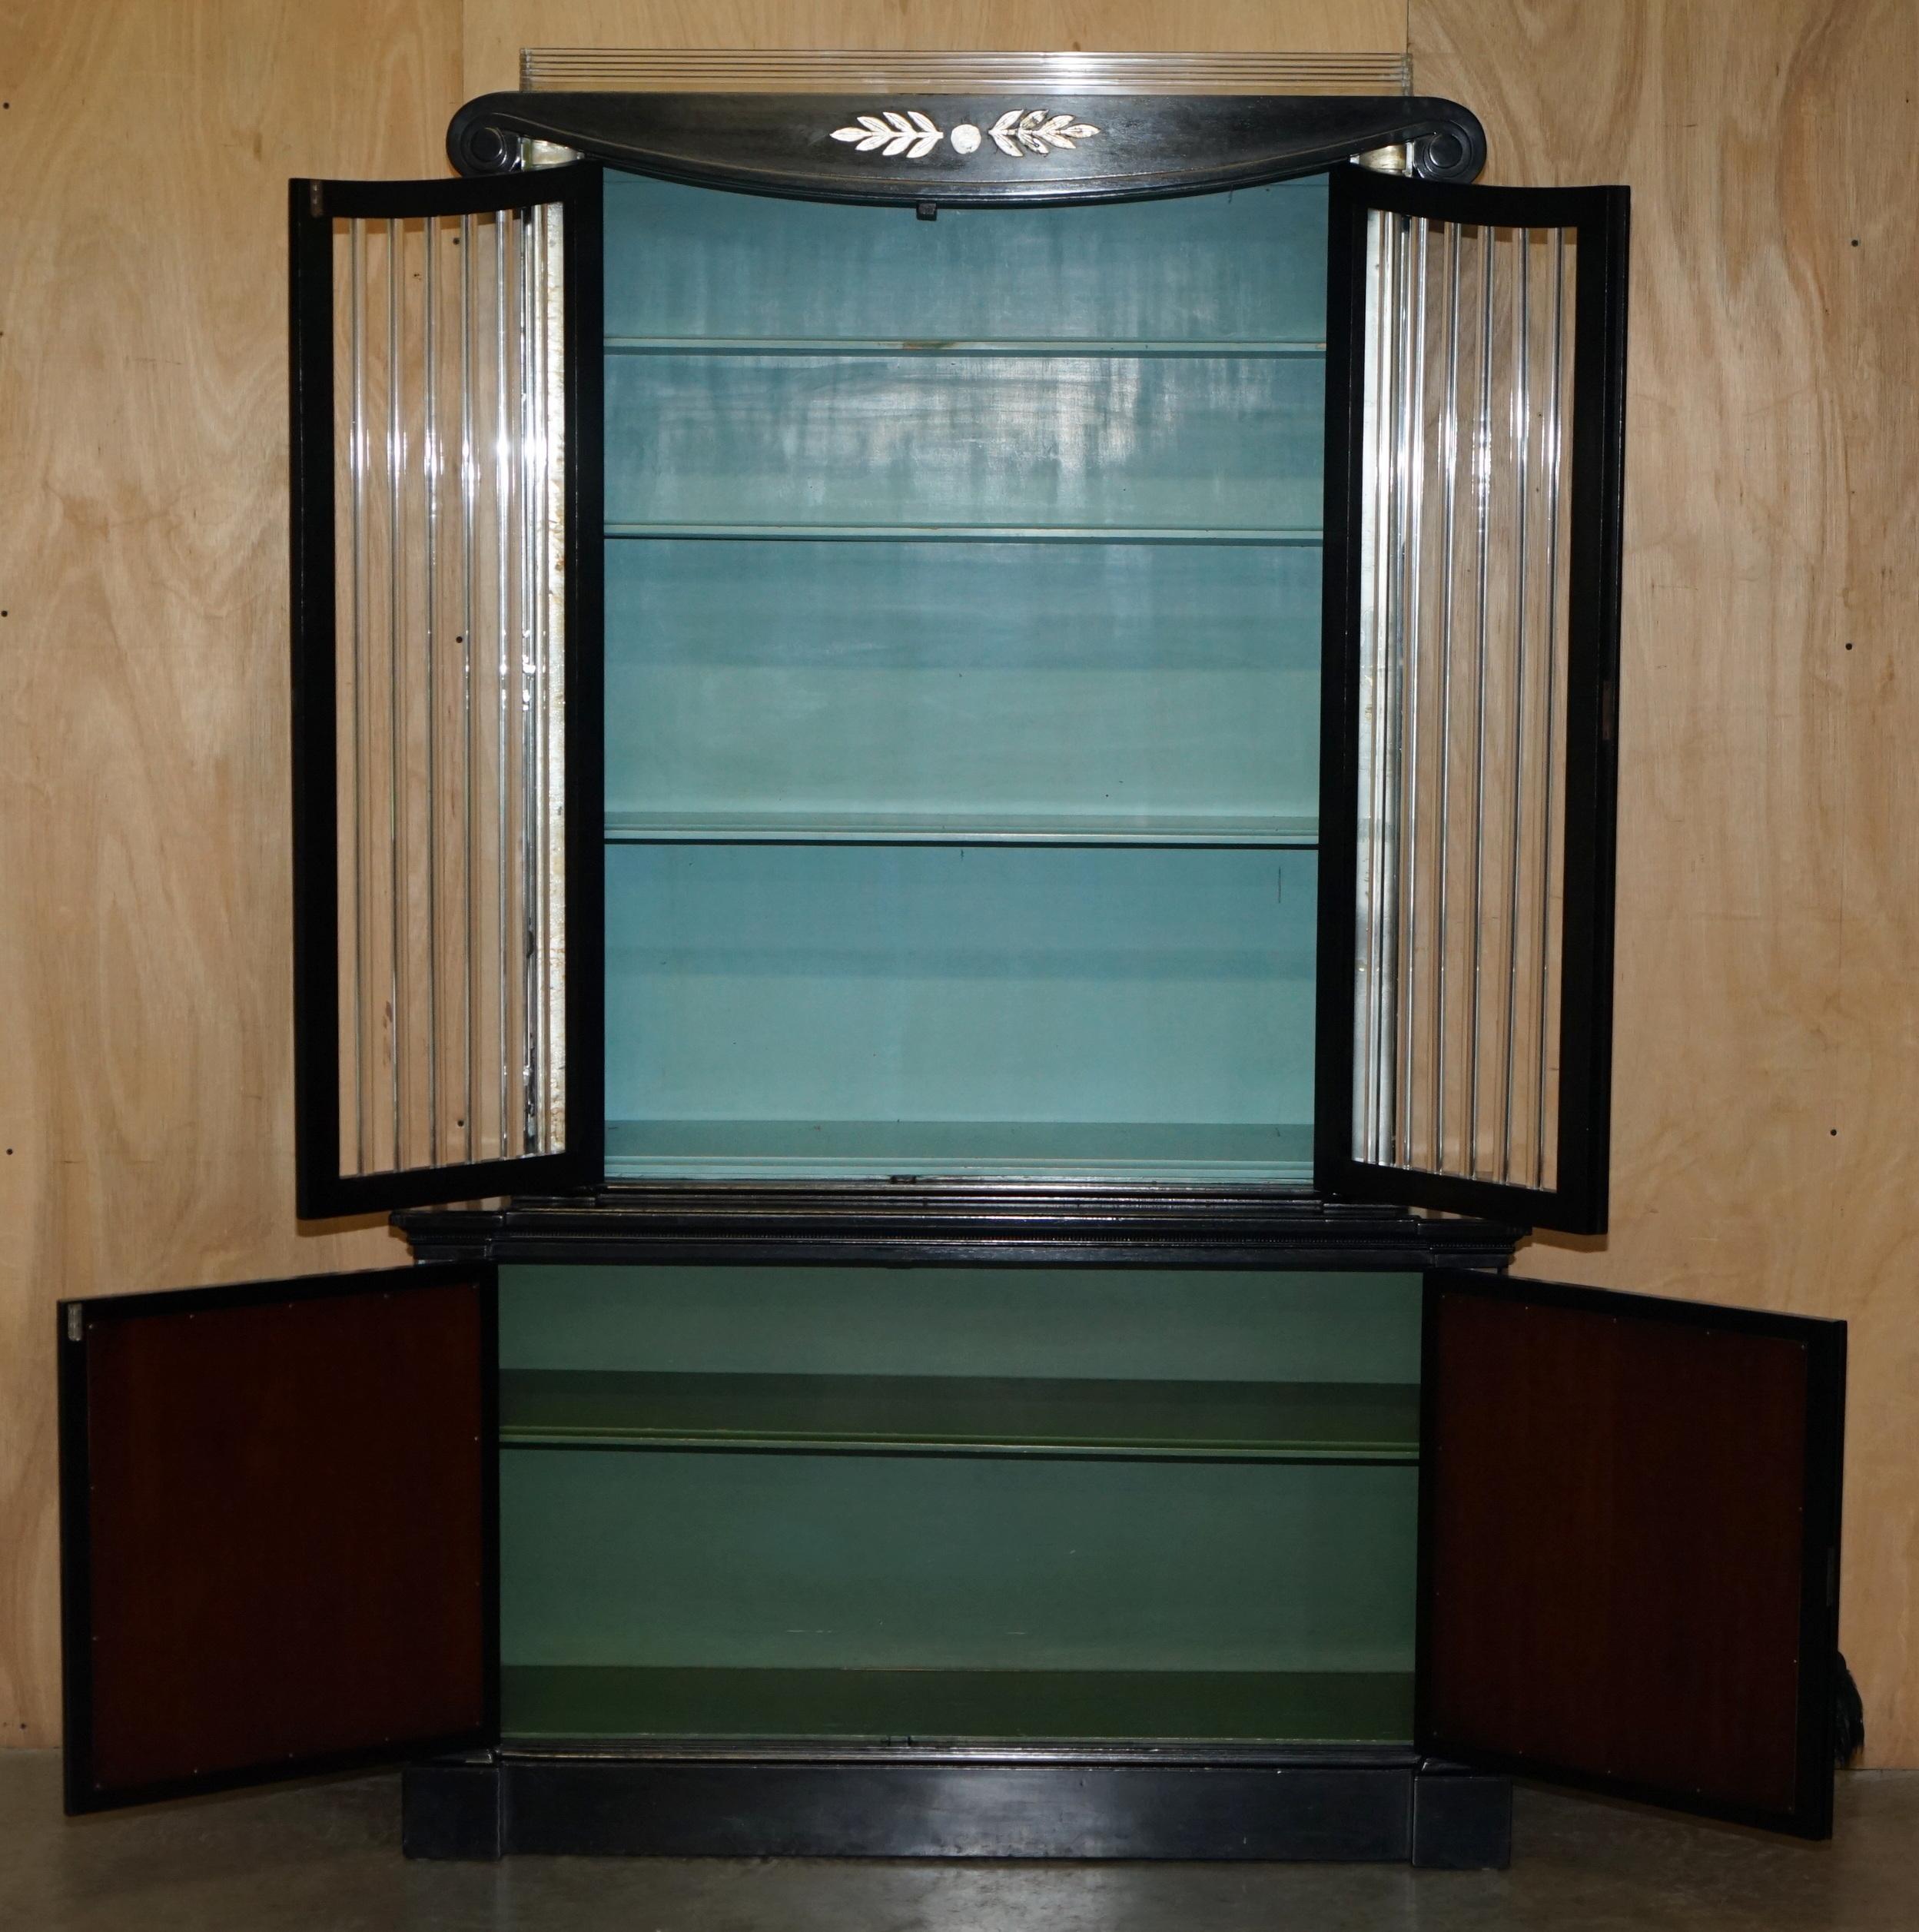 ORIGINAL ART DECO BOOKCASE CABiNET MADE BY LORIN JACKSON FOR GROSFELD HOUSE For Sale 8